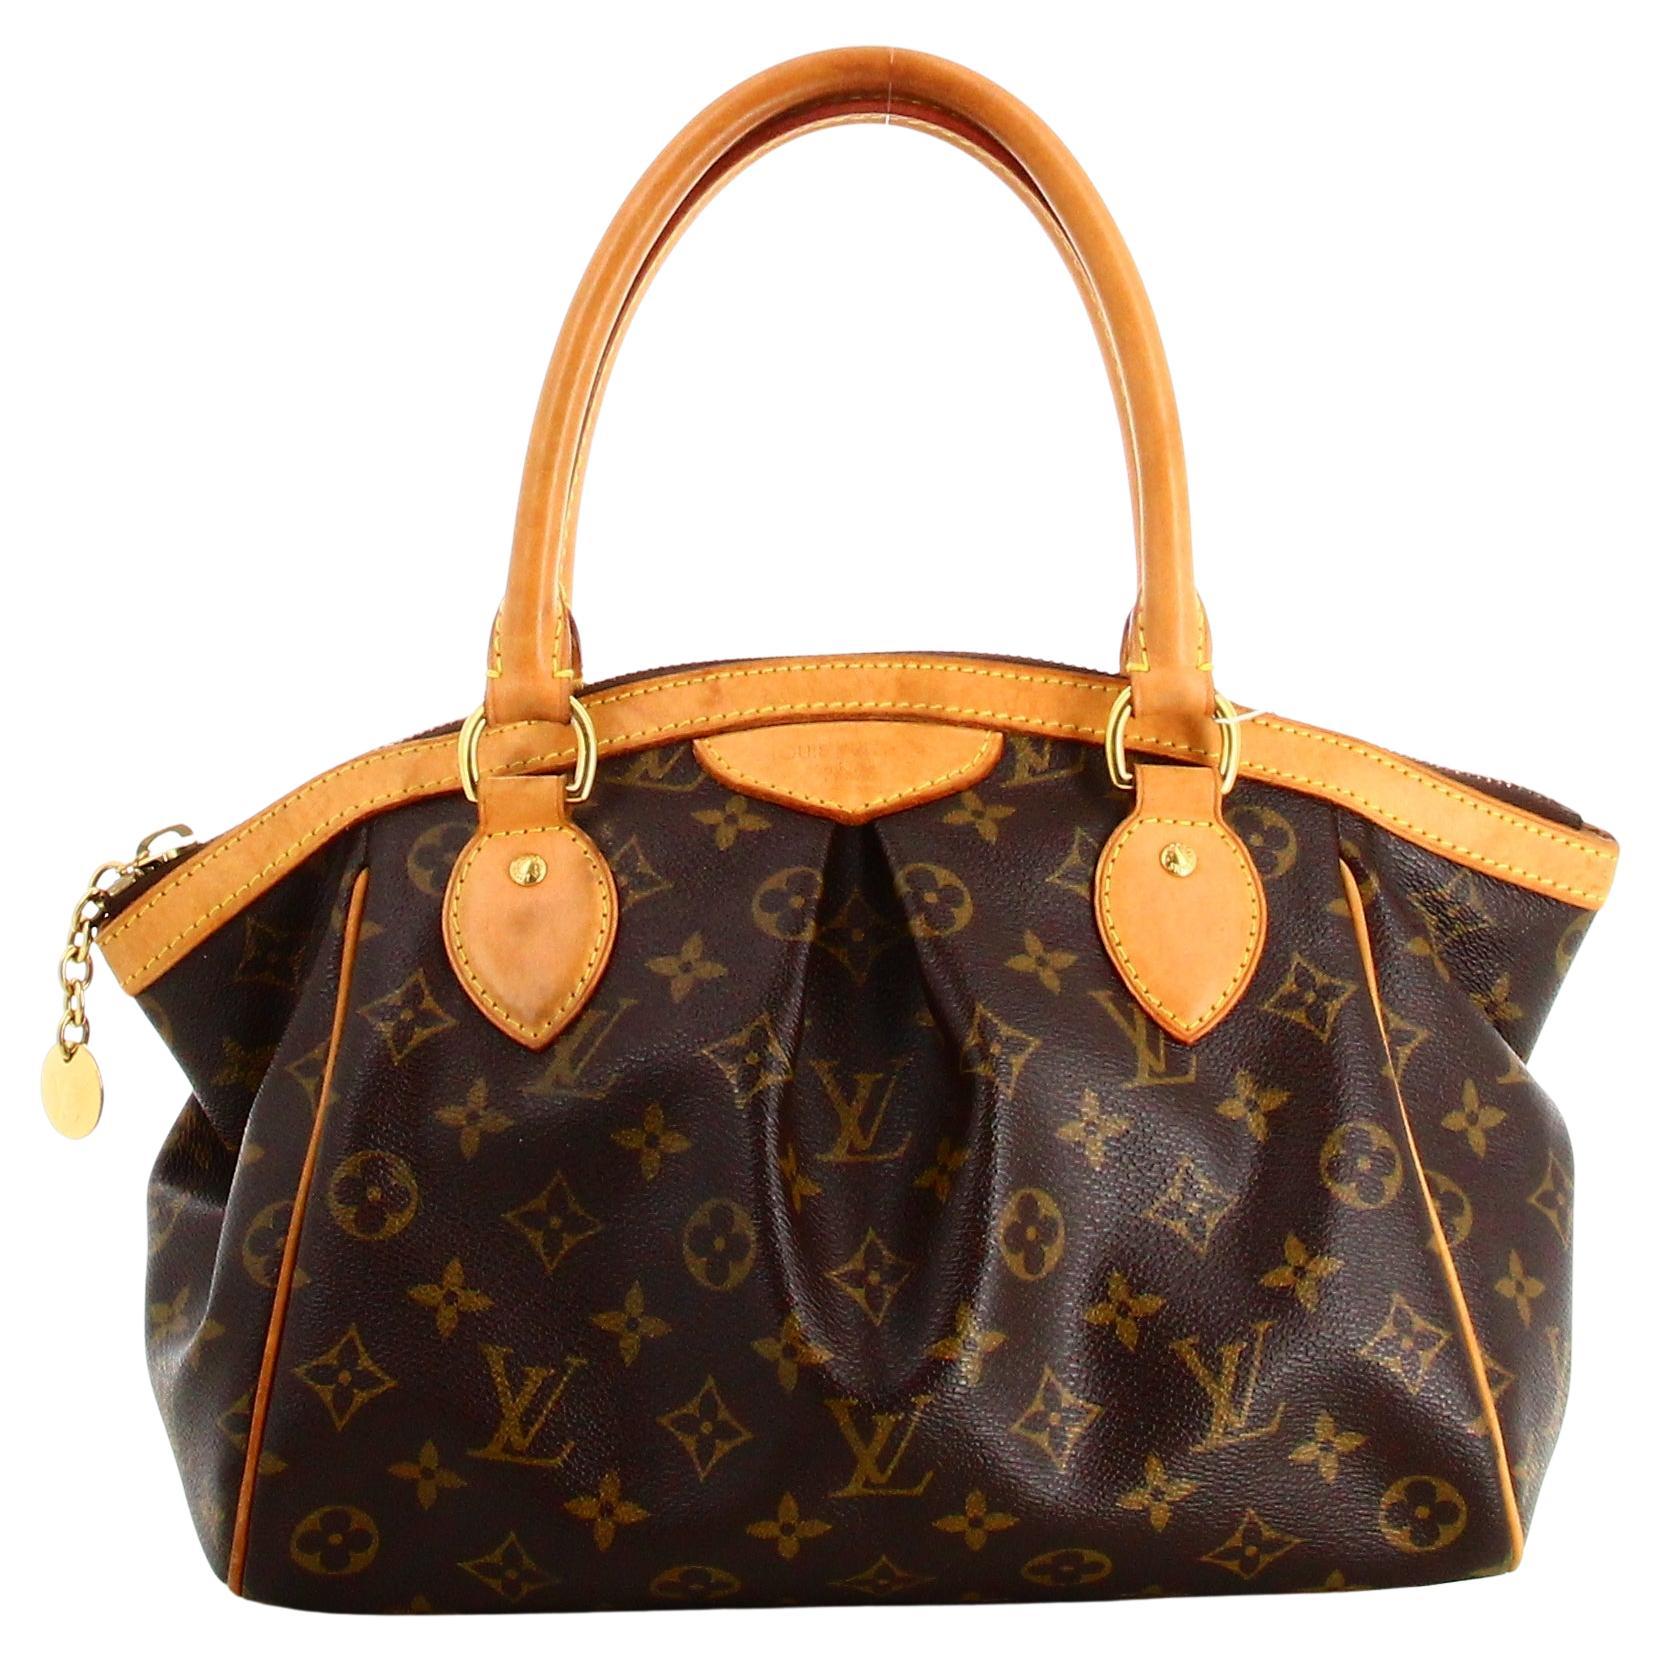 Does vintage Louis Vuitton have serial numbers?